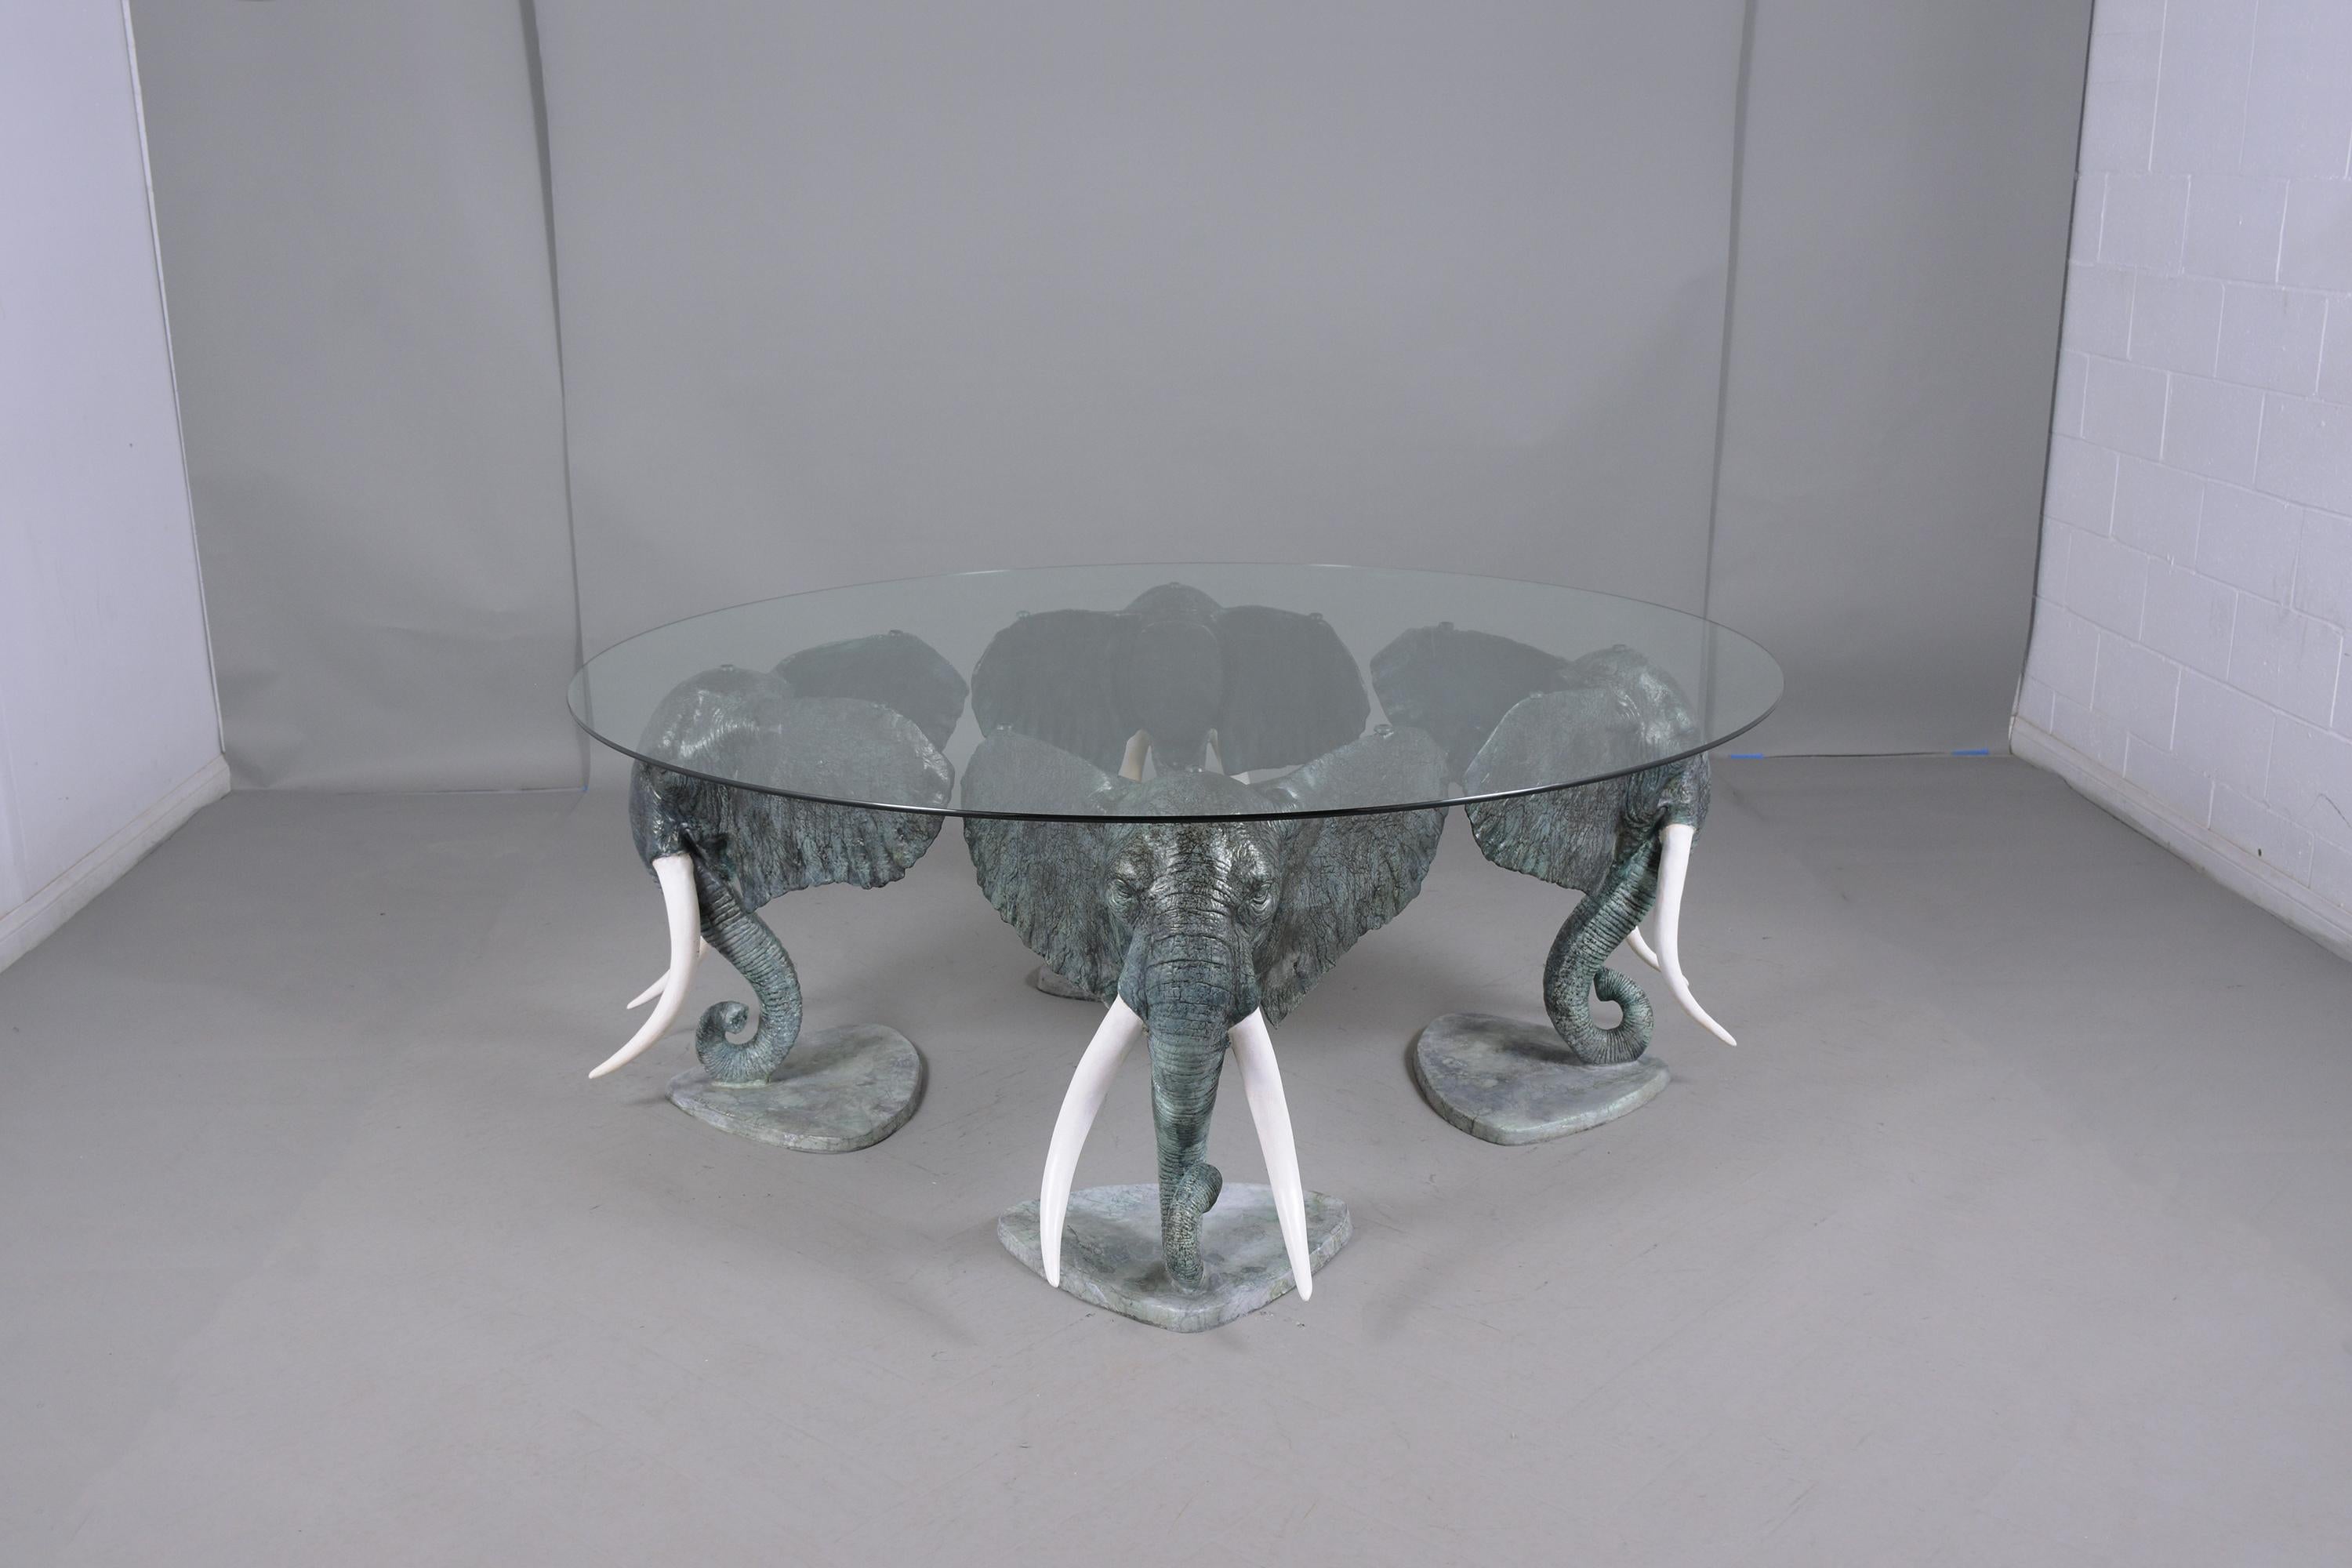 An exceptional sculpture center table features a base made out of four elephant heads crafted out of metal l this intricated and is in good condition. The round center table features a new 3/8 clear glass with flat polished supporting by four